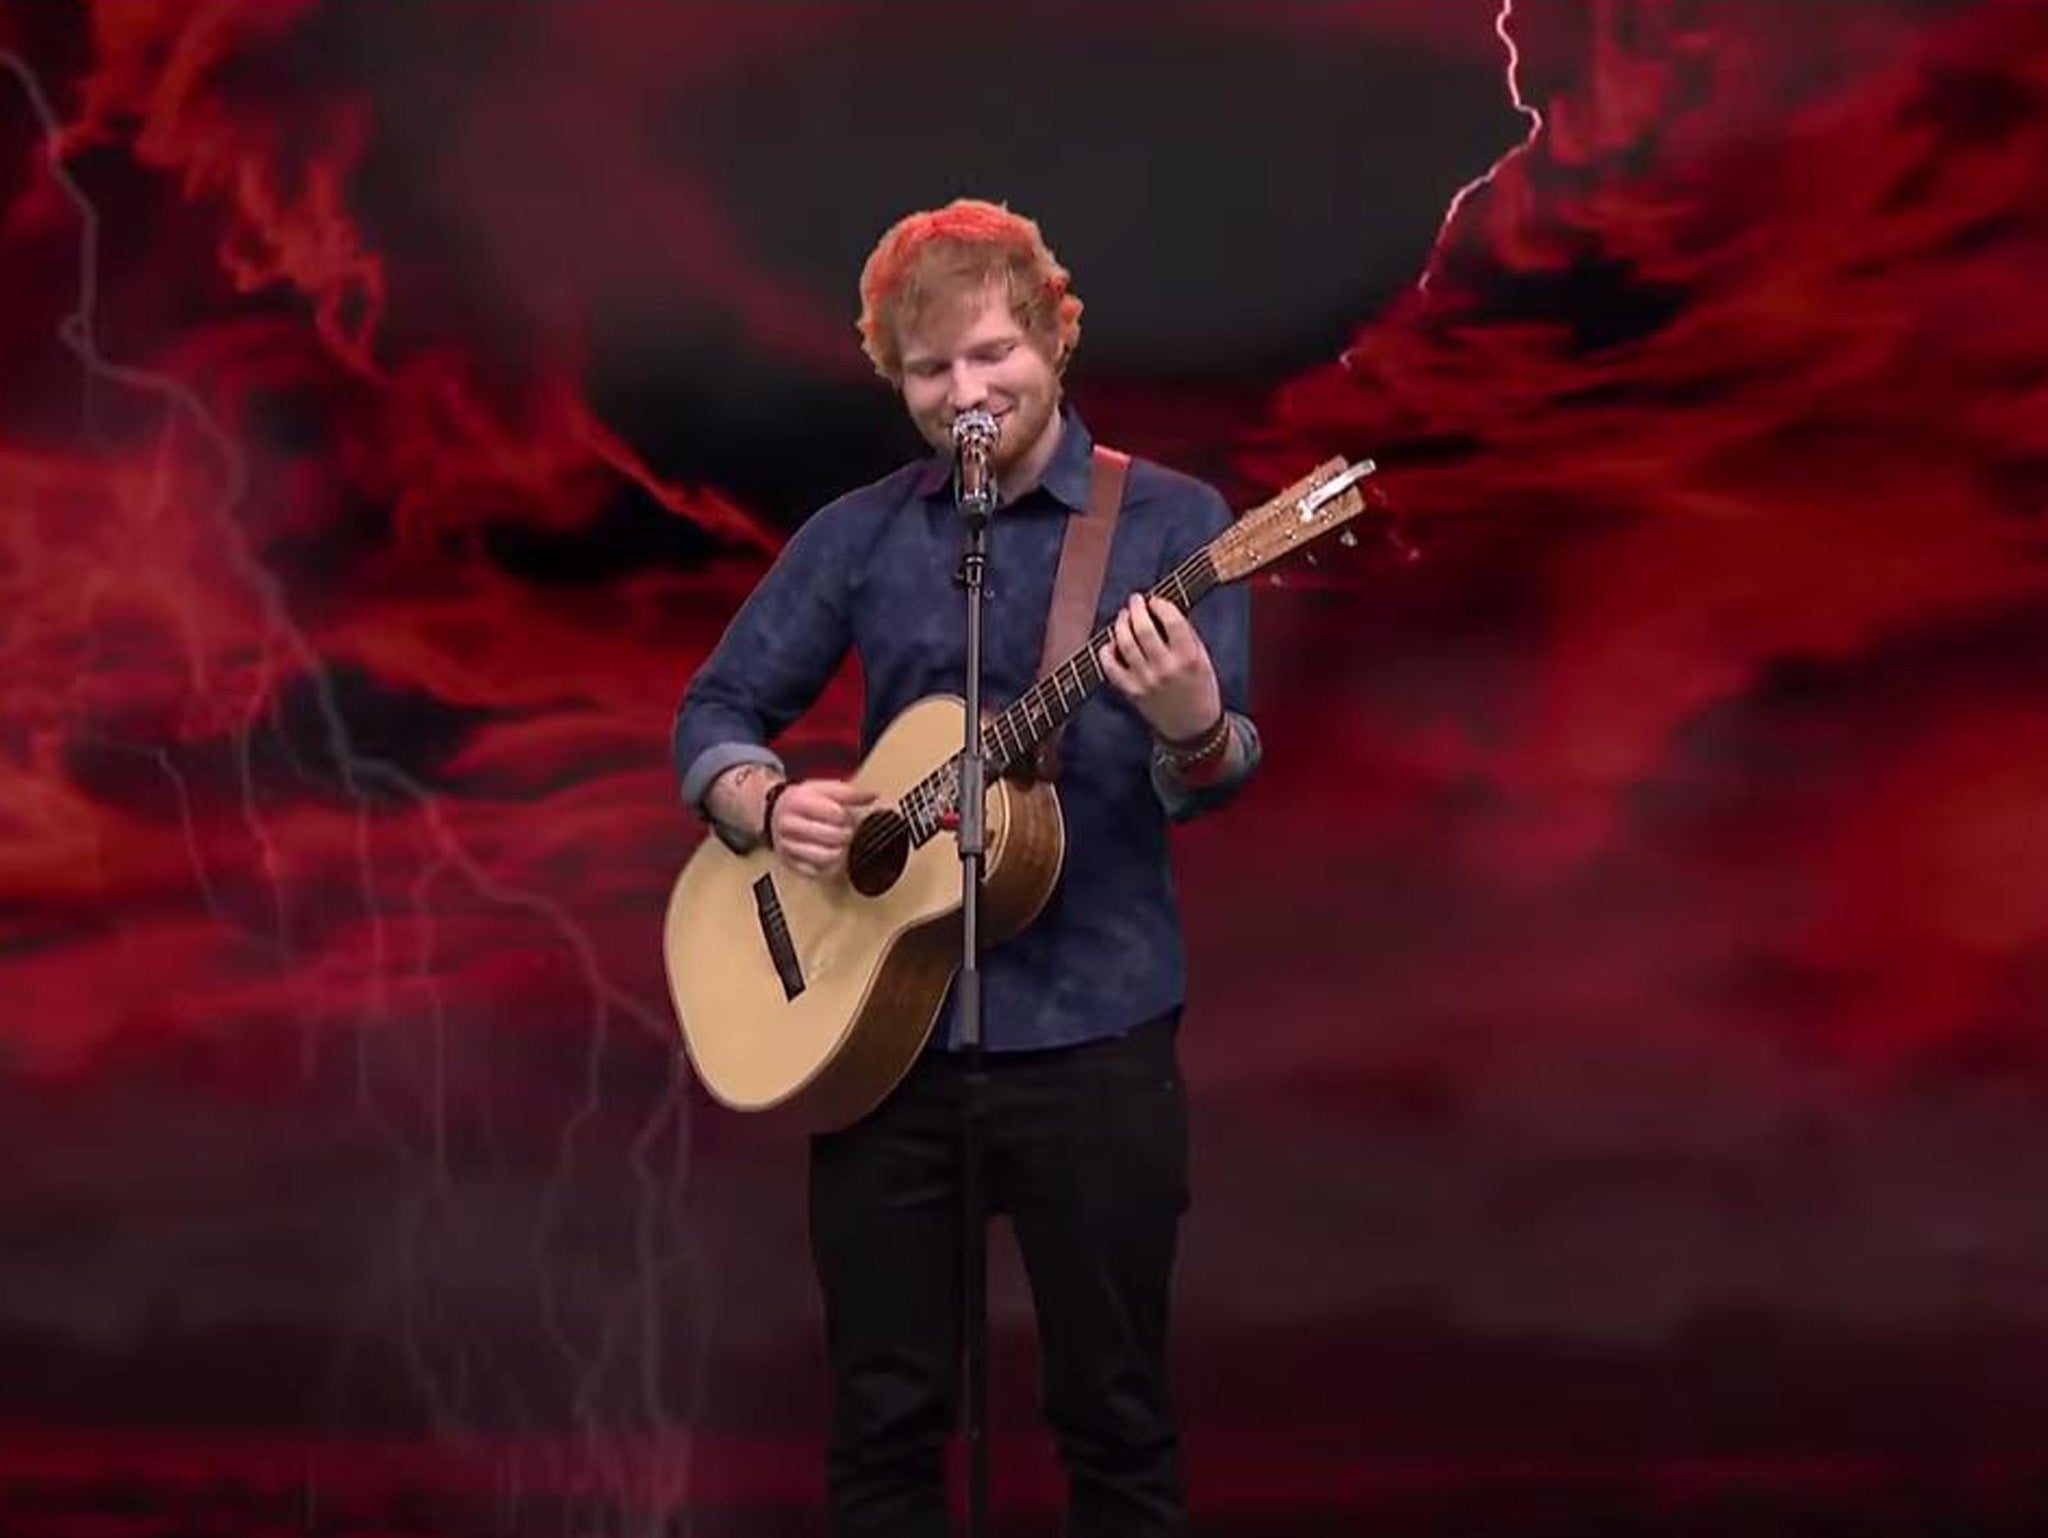 Ed Sheeran covers Iron Maiden and Limp Bizkit on the Jimmy Fallon Show